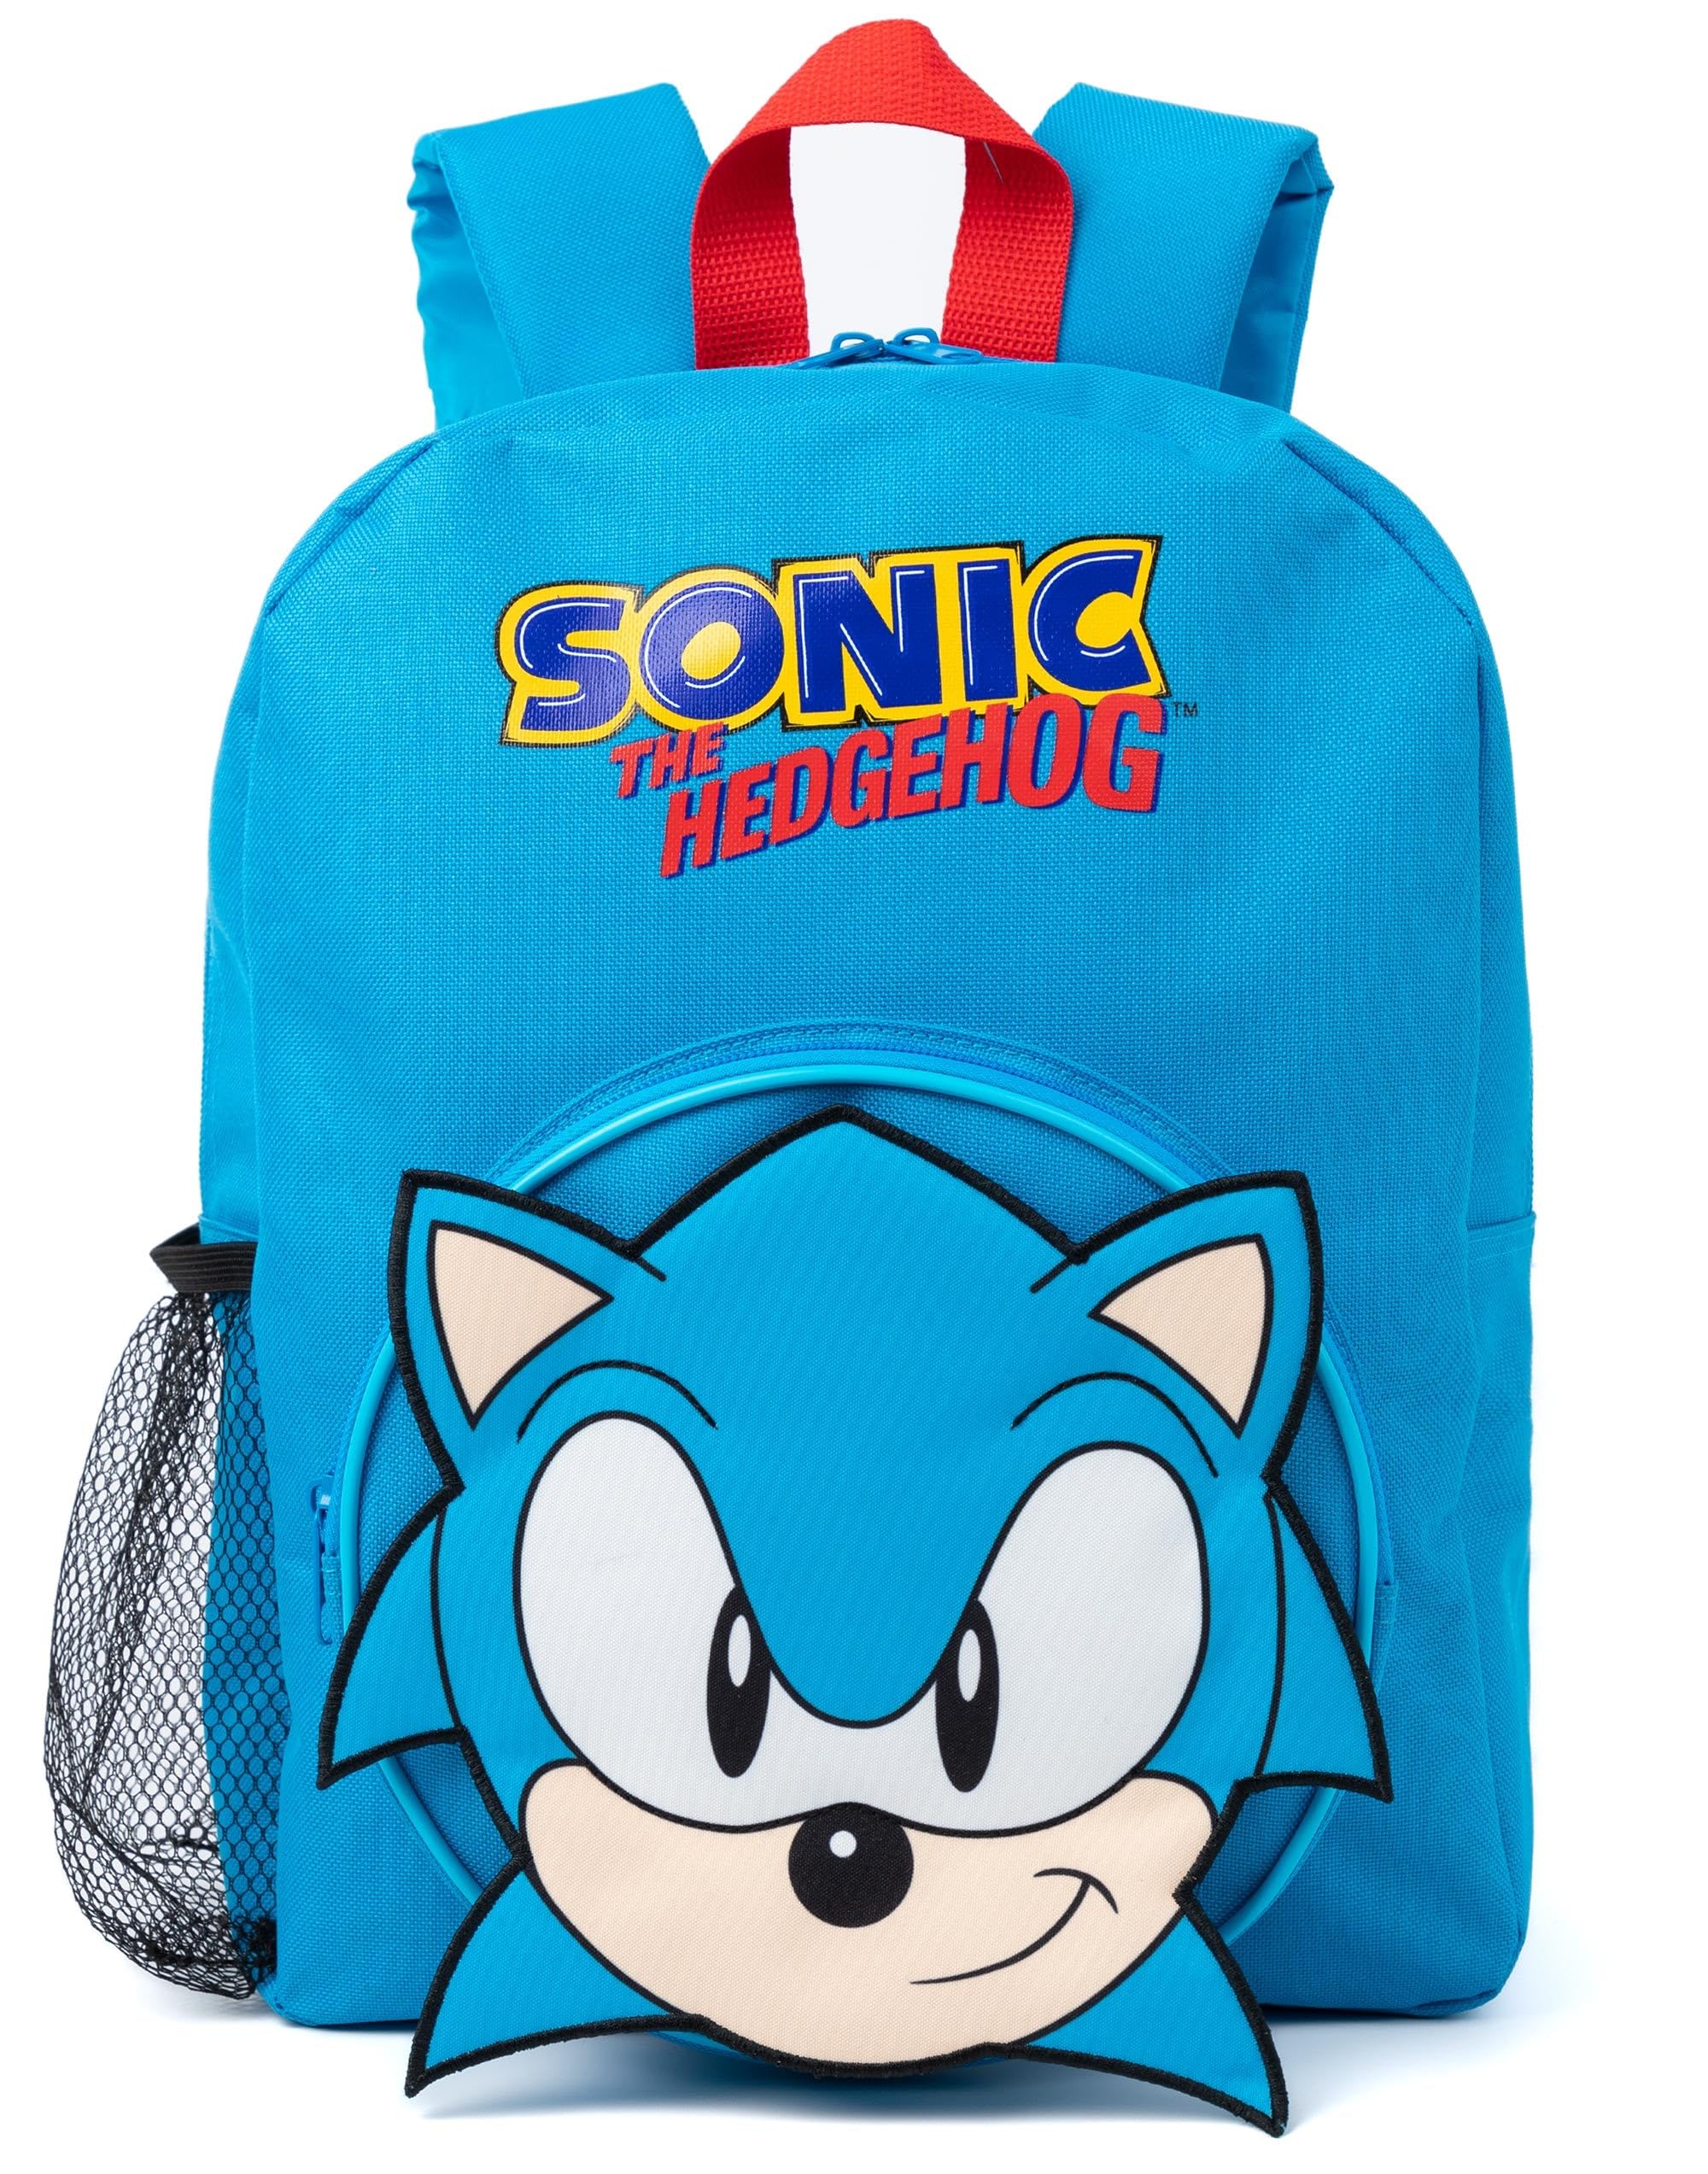 Sonic The Hedgehog Boys Backpack Set | Blue Sonic Design | Comes with Pencil Case and Water Bottle